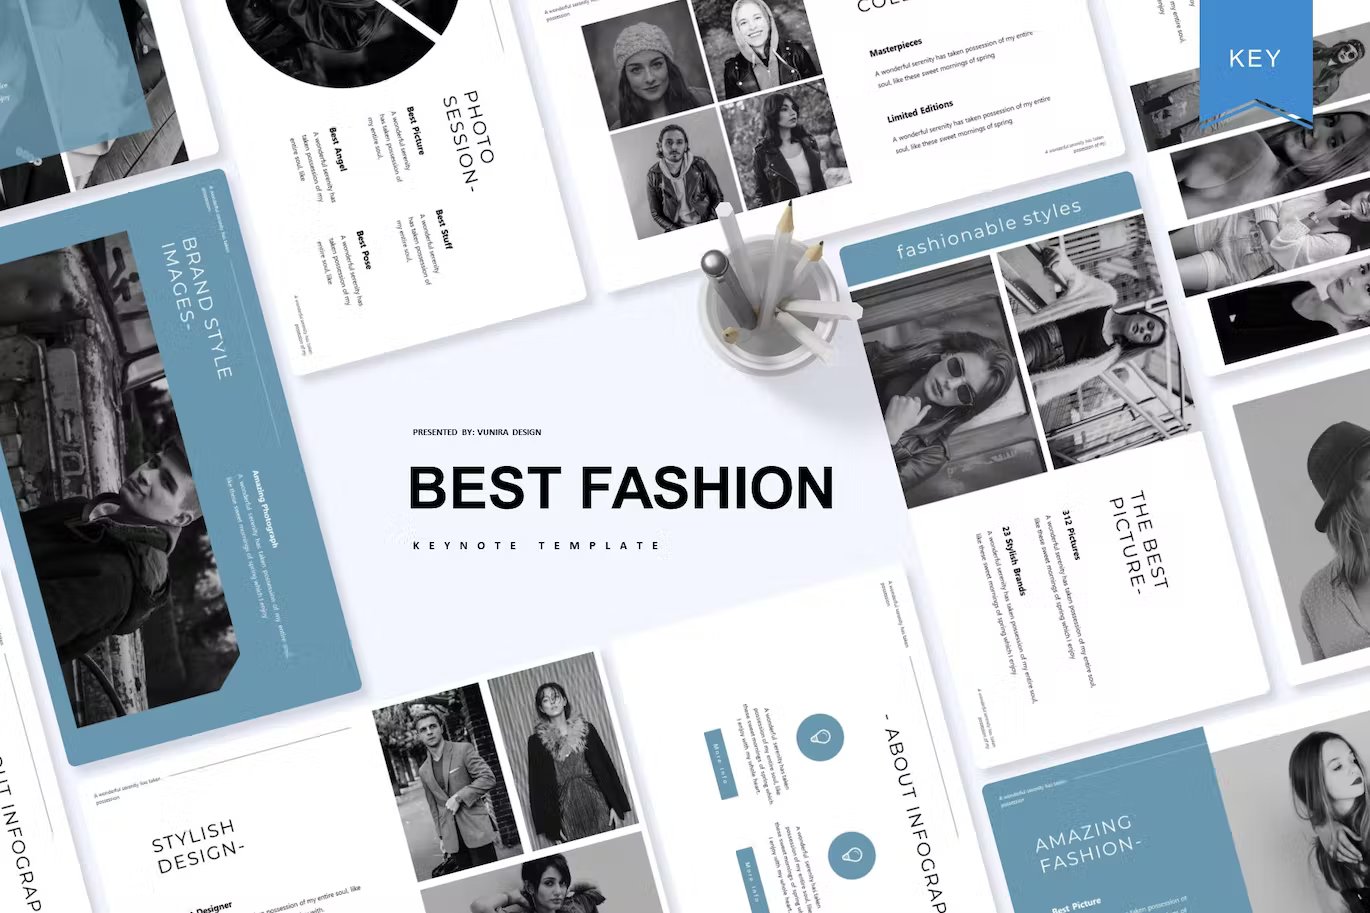 Black lettering "Best Fashion Keynote Template" and different templates on a gray background.